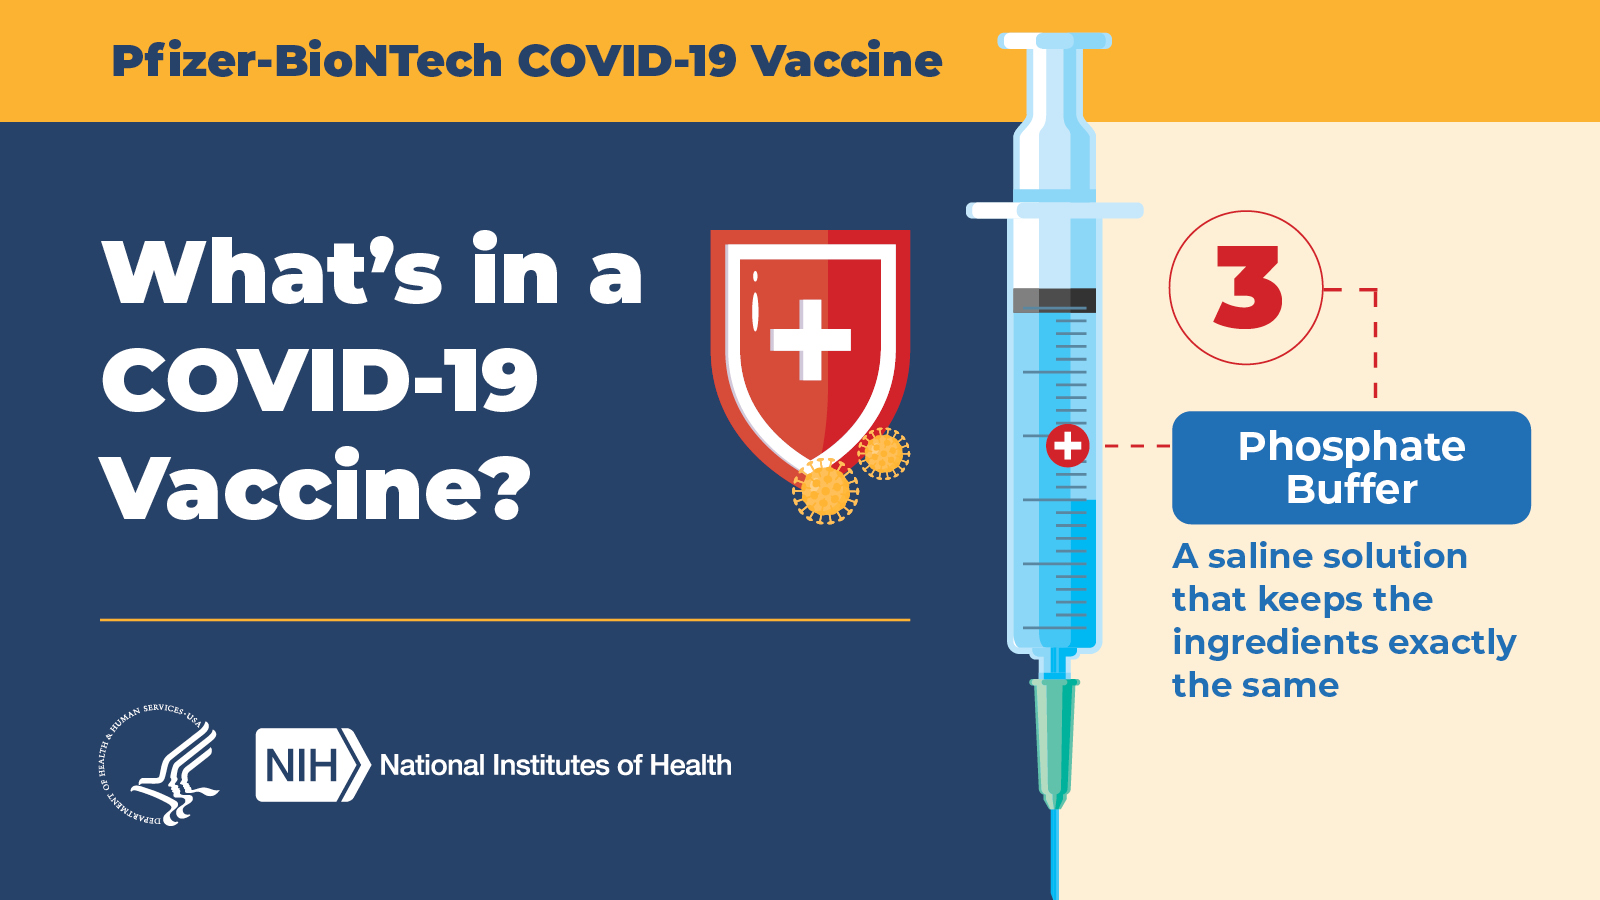 Pfizer-BioNTech COV ID-19 Vaccine  |  What's in a COVID-19 vaccine? 3: Phosphate Buffer: A saline solution that keeps the ingredients exactly the same